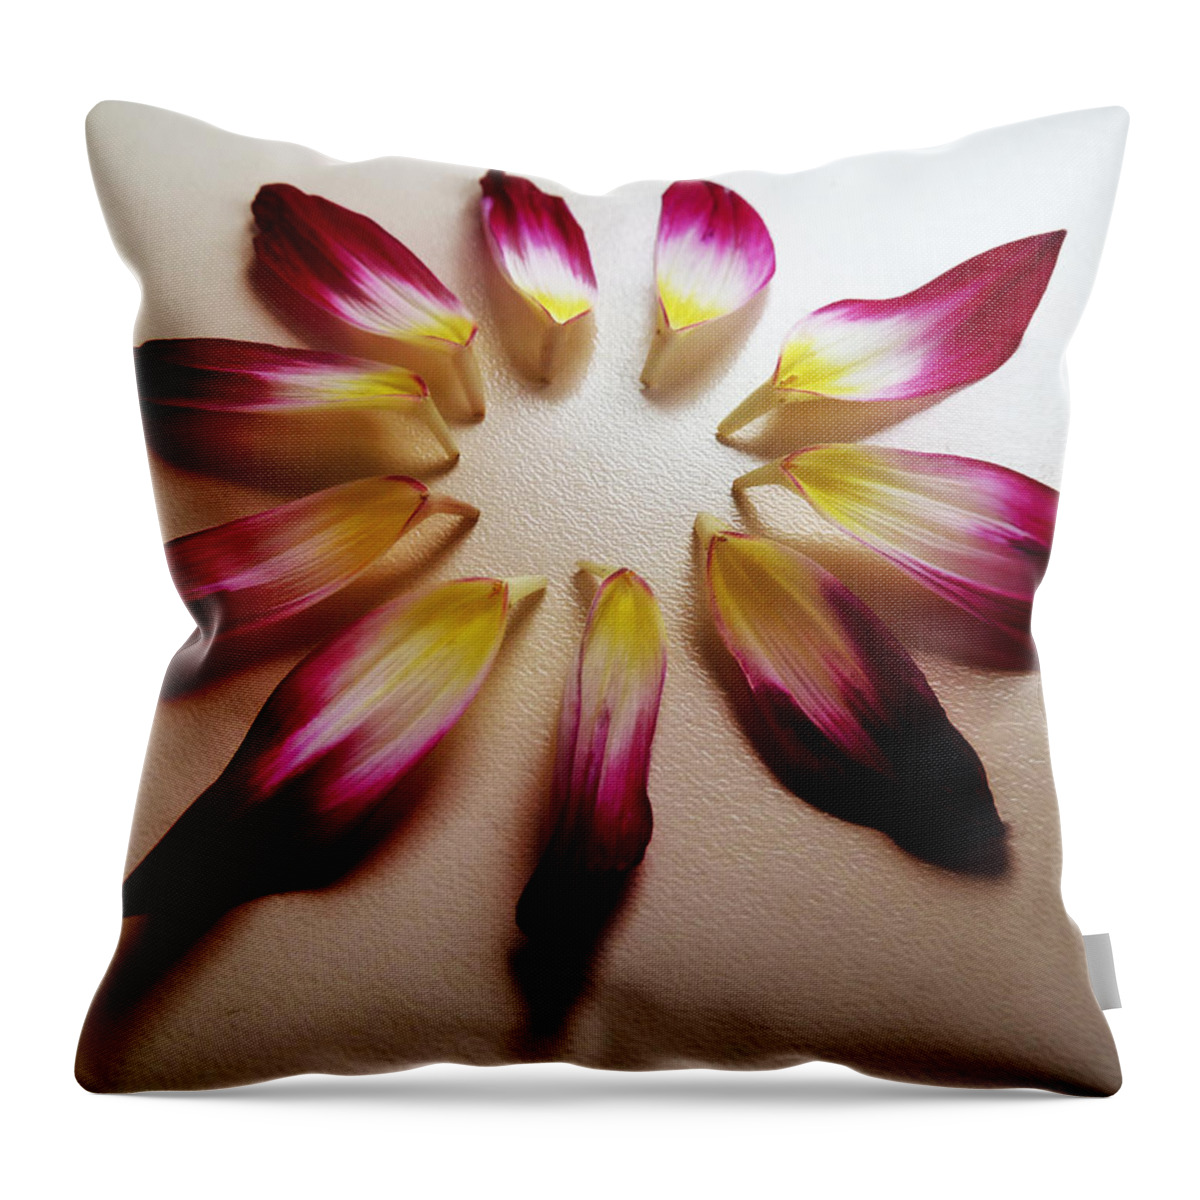 Petals Throw Pillow featuring the photograph The Petal Cake by Steve Taylor